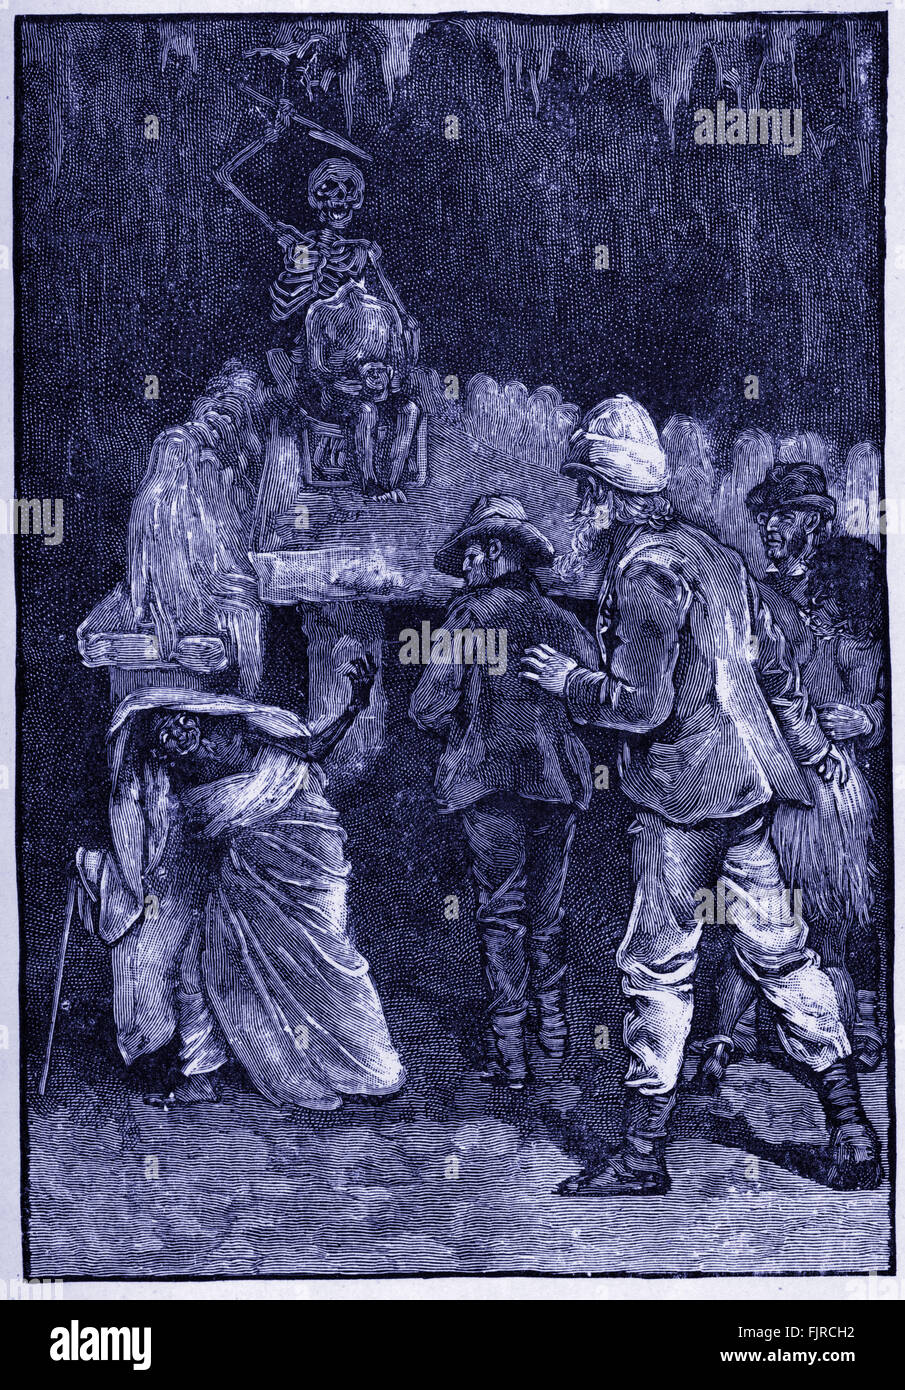 H. Rider Haggard's novel King Solomon's Mines.  Illustration by Walter Paget entitled 'To those who enter the hall of the dead, evil comes'. First published 1885. Haggard, English author, 22 June 1856 - 14 May 1925. Adventure story. Stock Photo